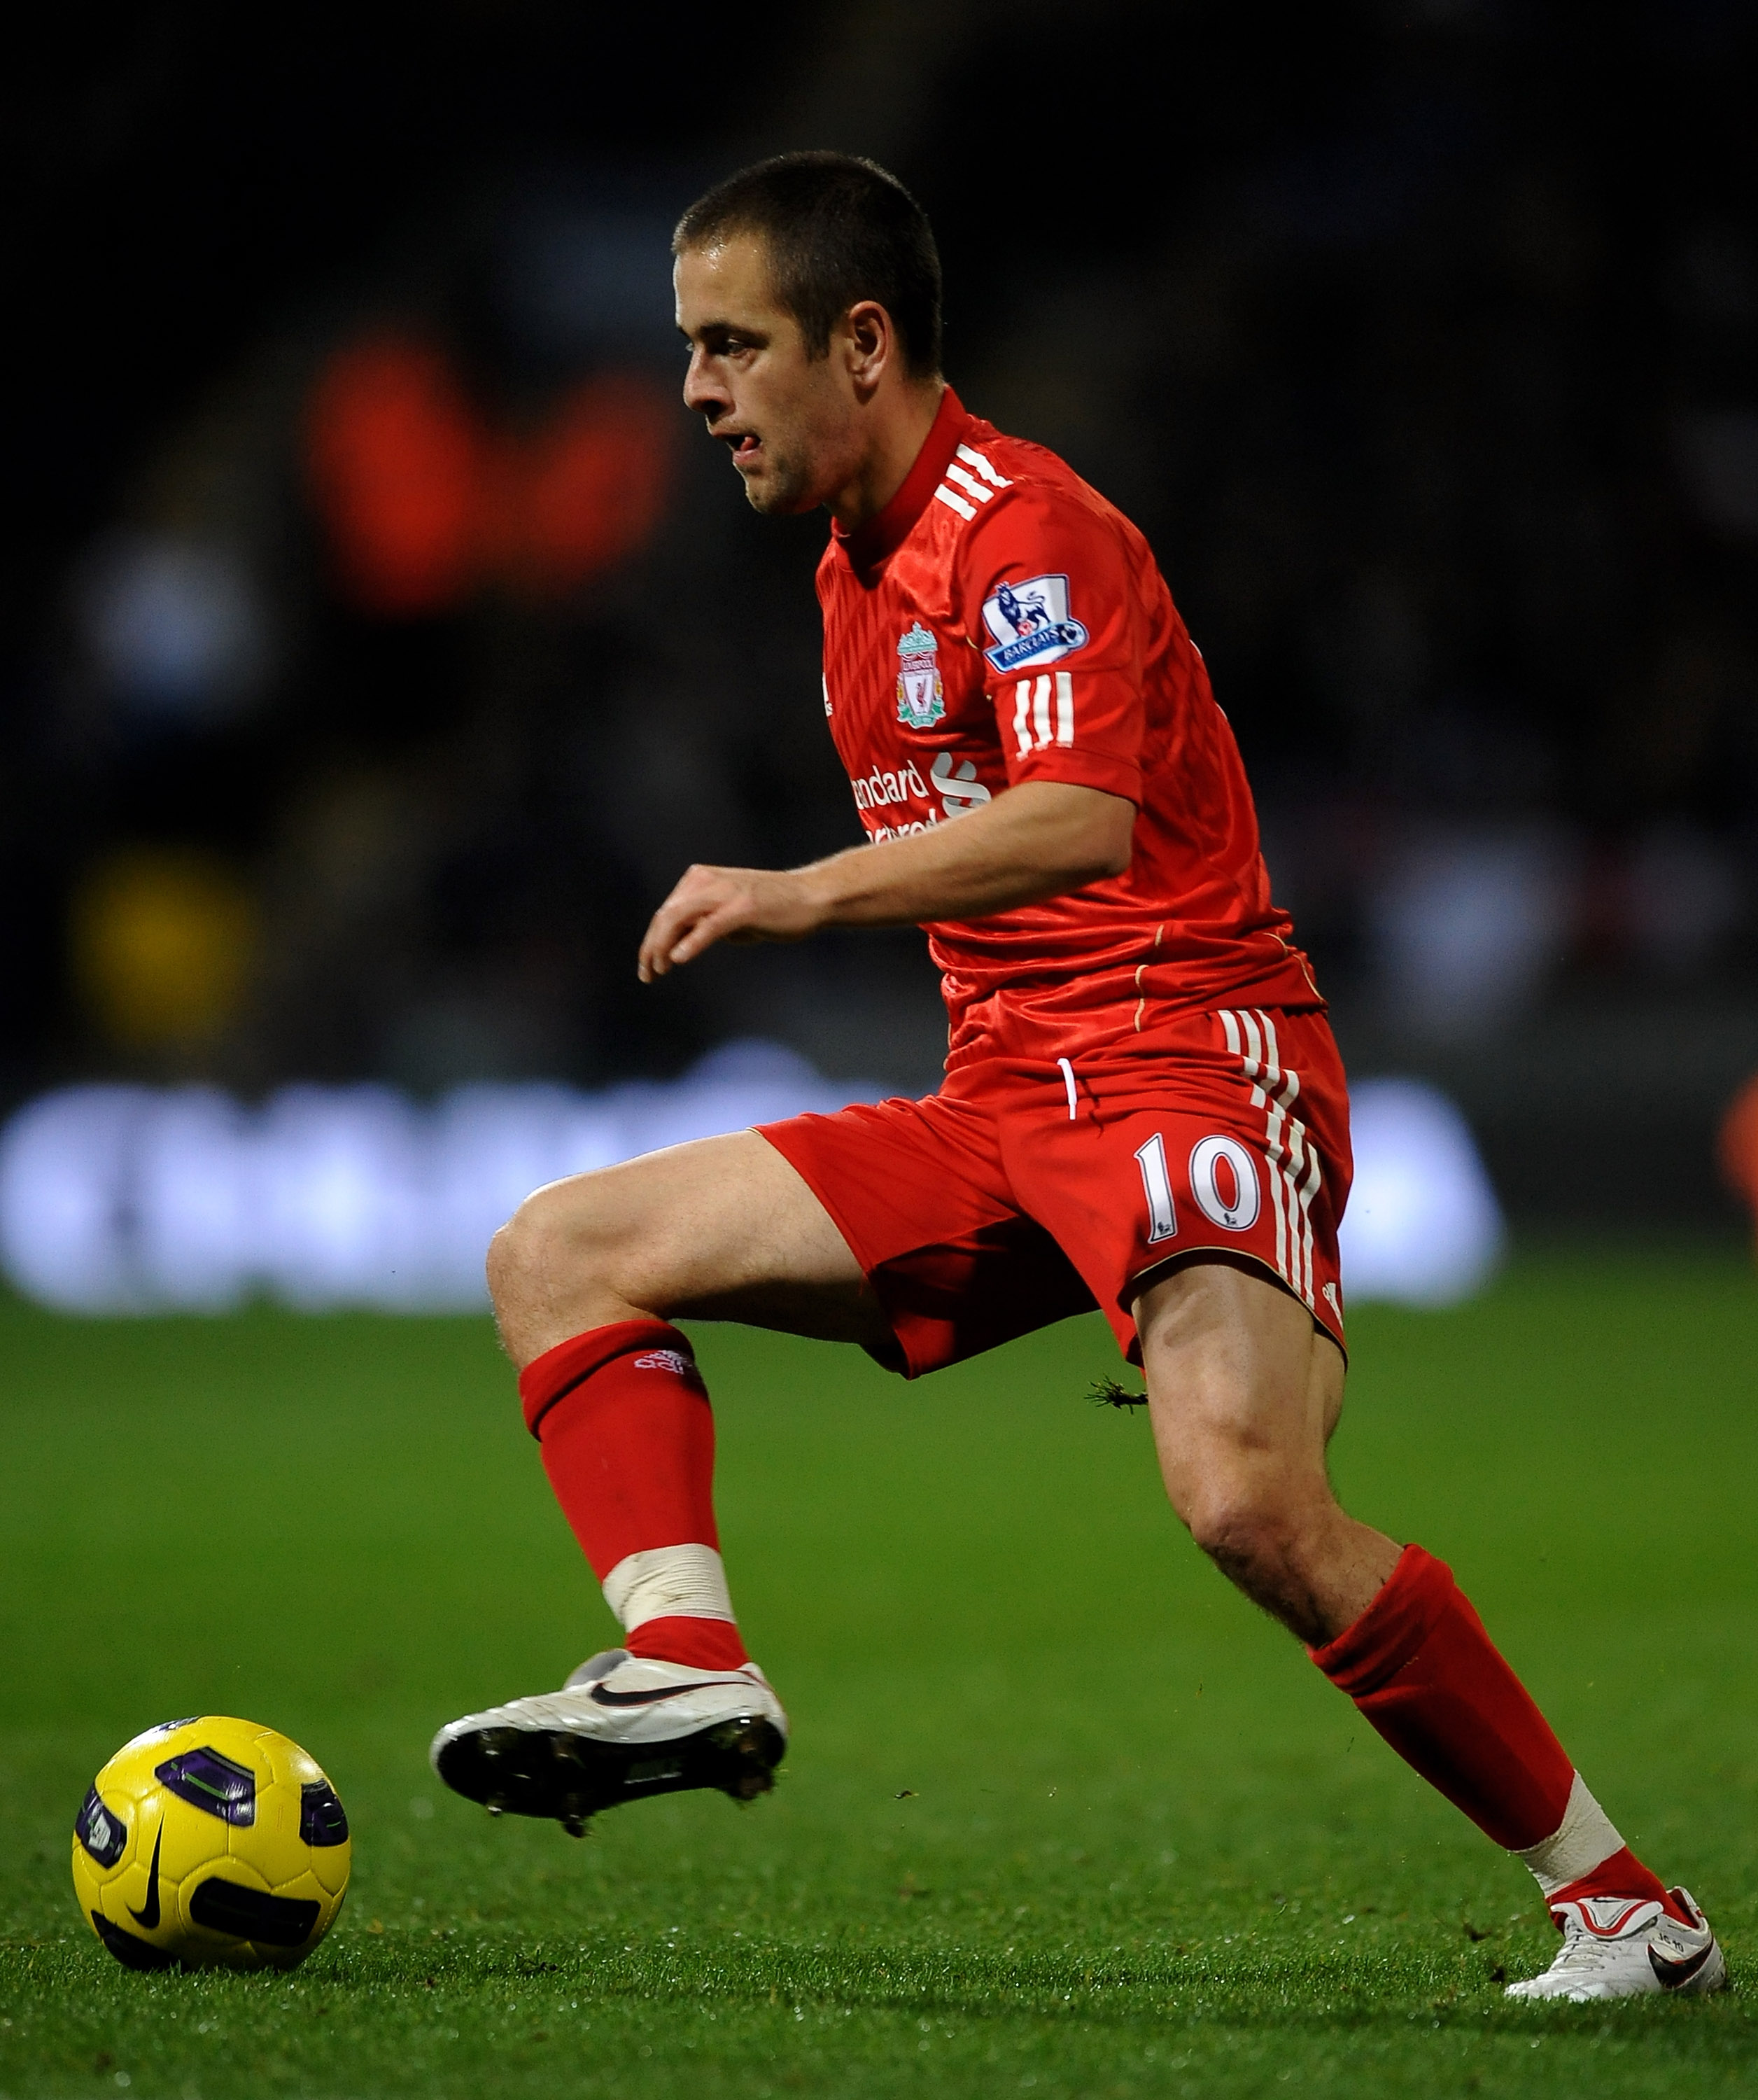 BOLTON, ENGLAND - OCTOBER 31:  Joe Cole of Liverpool in action during the Barclays Premier League match between Bolton Wanderers and Liverpool at the Reebok Stadium on October 31, 2010 in Bolton, England.  (Photo by Laurence Griffiths/Getty Images)